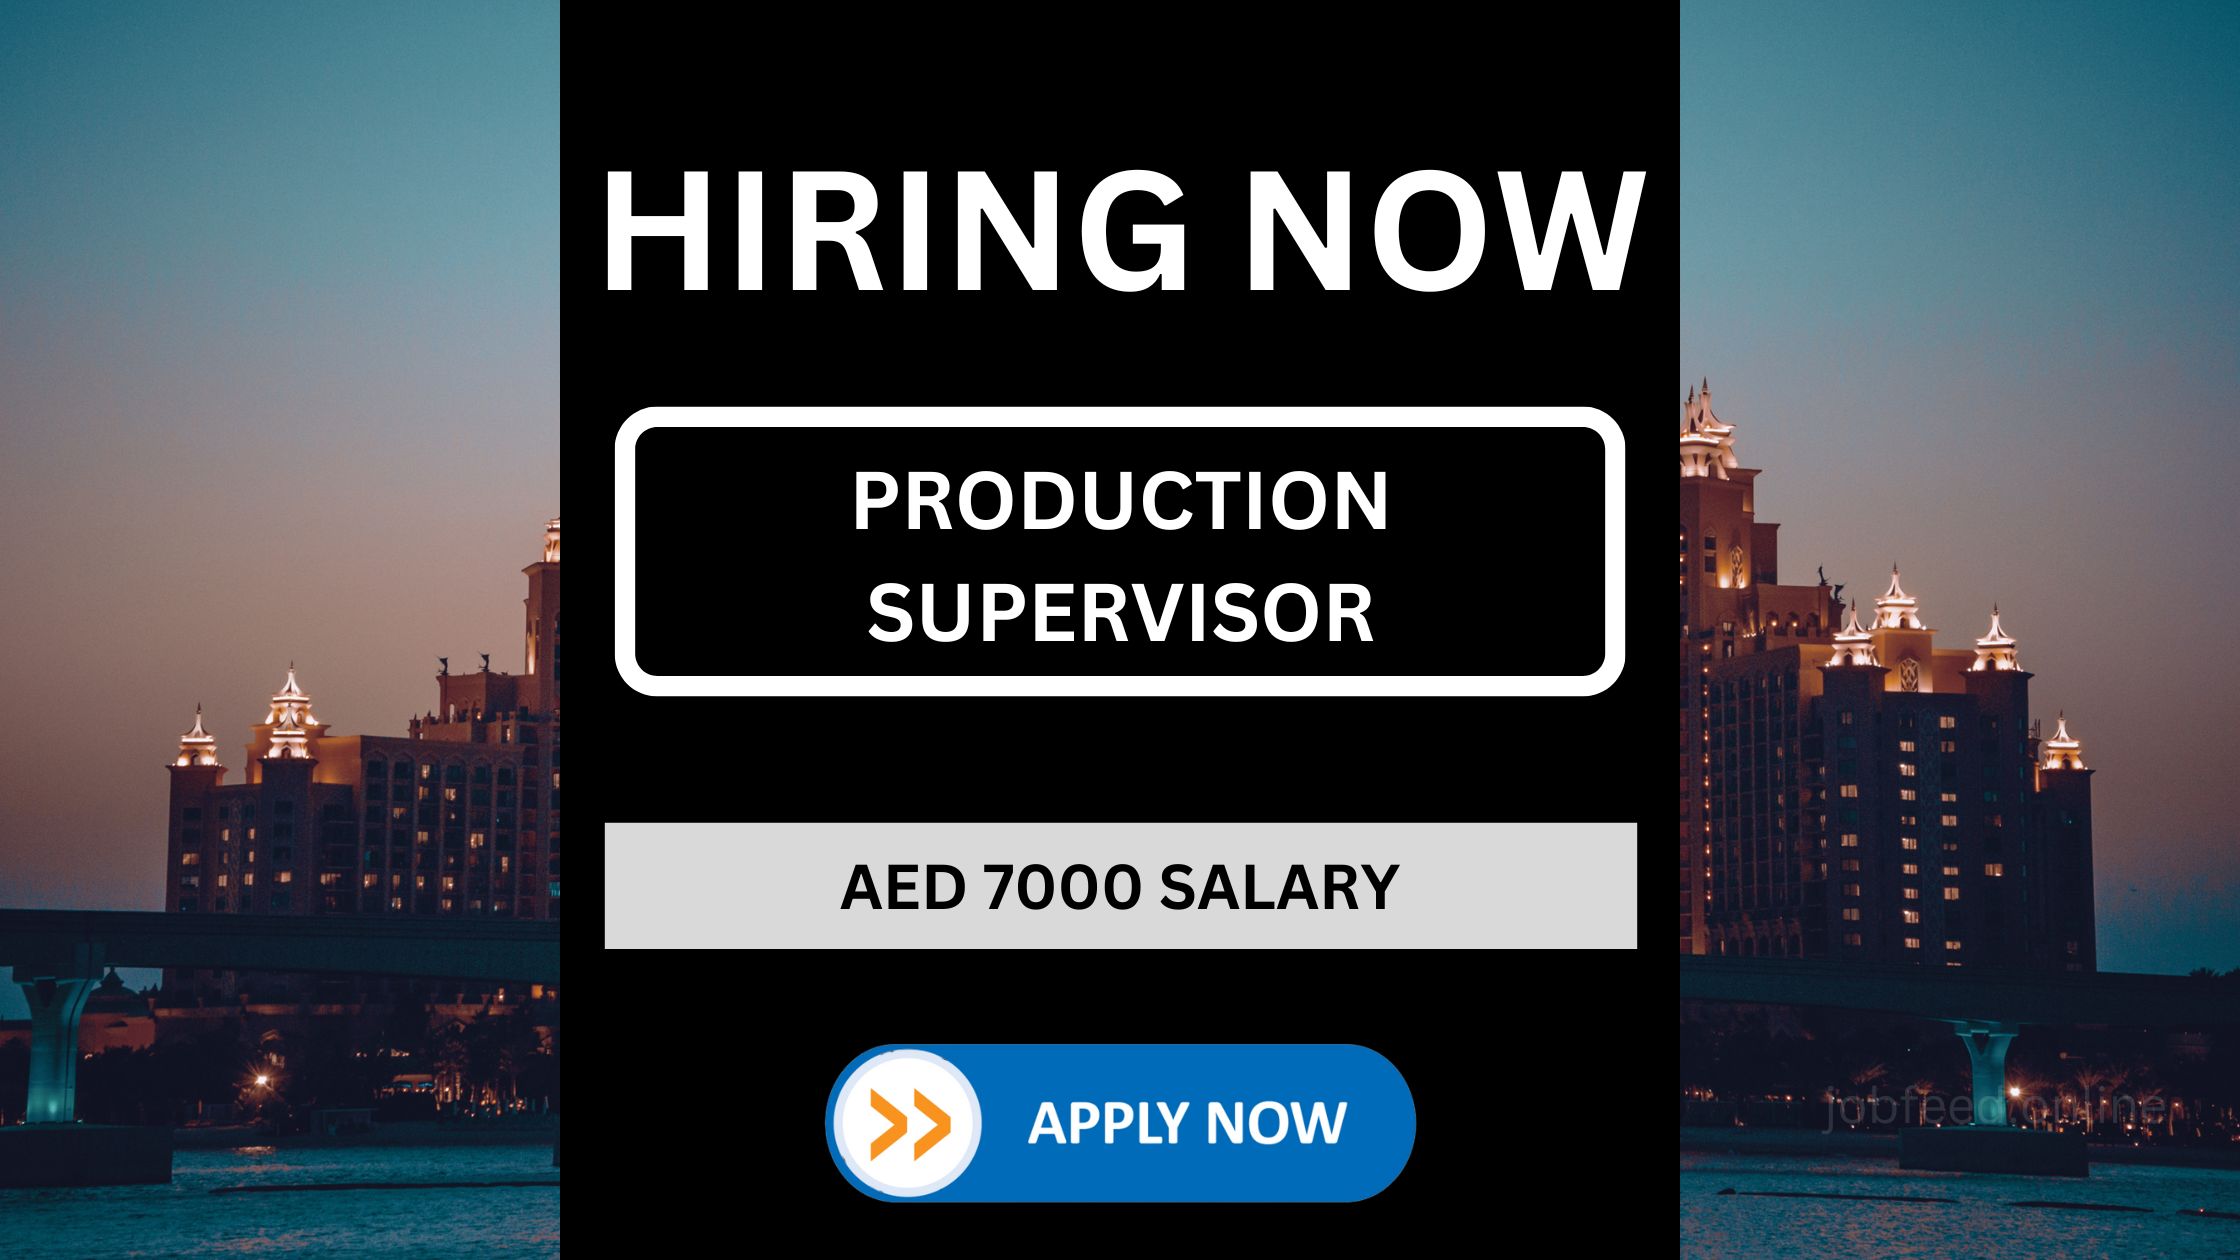 Production Supervisor: Leading Warehouse Operations with Skilled Blue-Collar Workforce